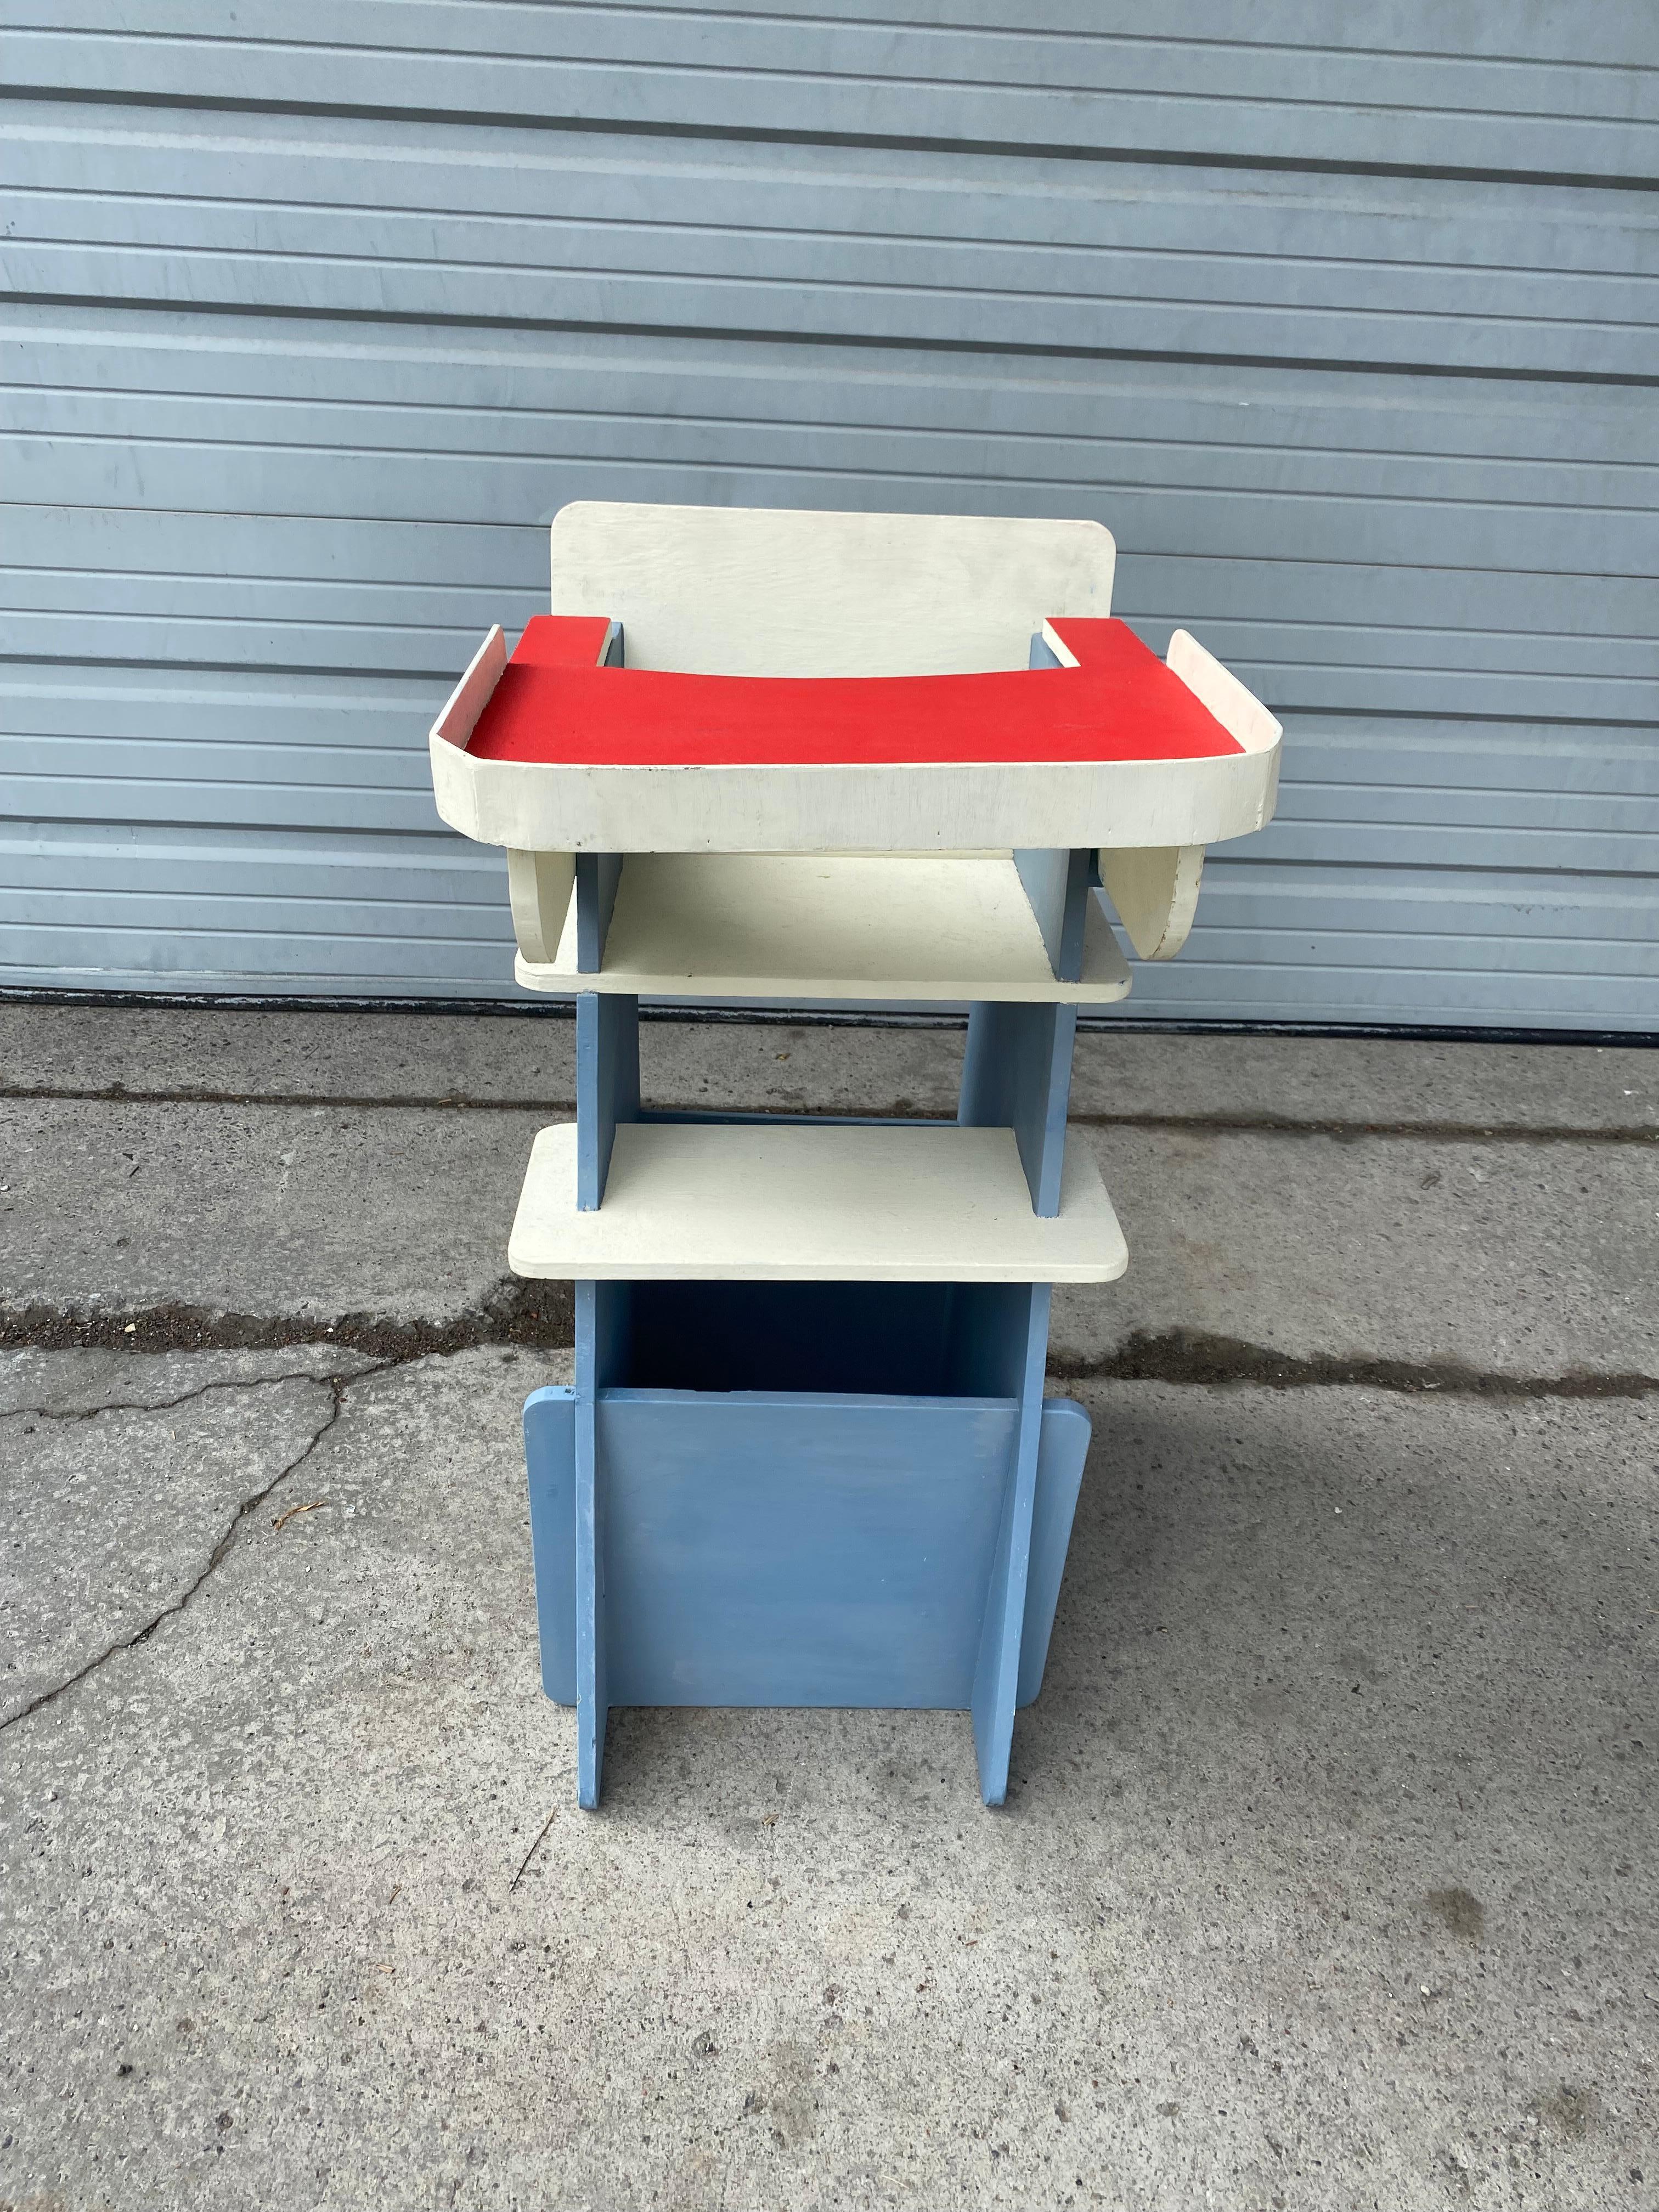 Unusual Constructivist Childs High Chair,, Great little item,, Recently purchased from prominent Buffalo Ny architect,, (noy sure if he designed )Very reminiscent of early designs by Gerrit Rietveld,, Super sturdy design and construction,,Ingenious